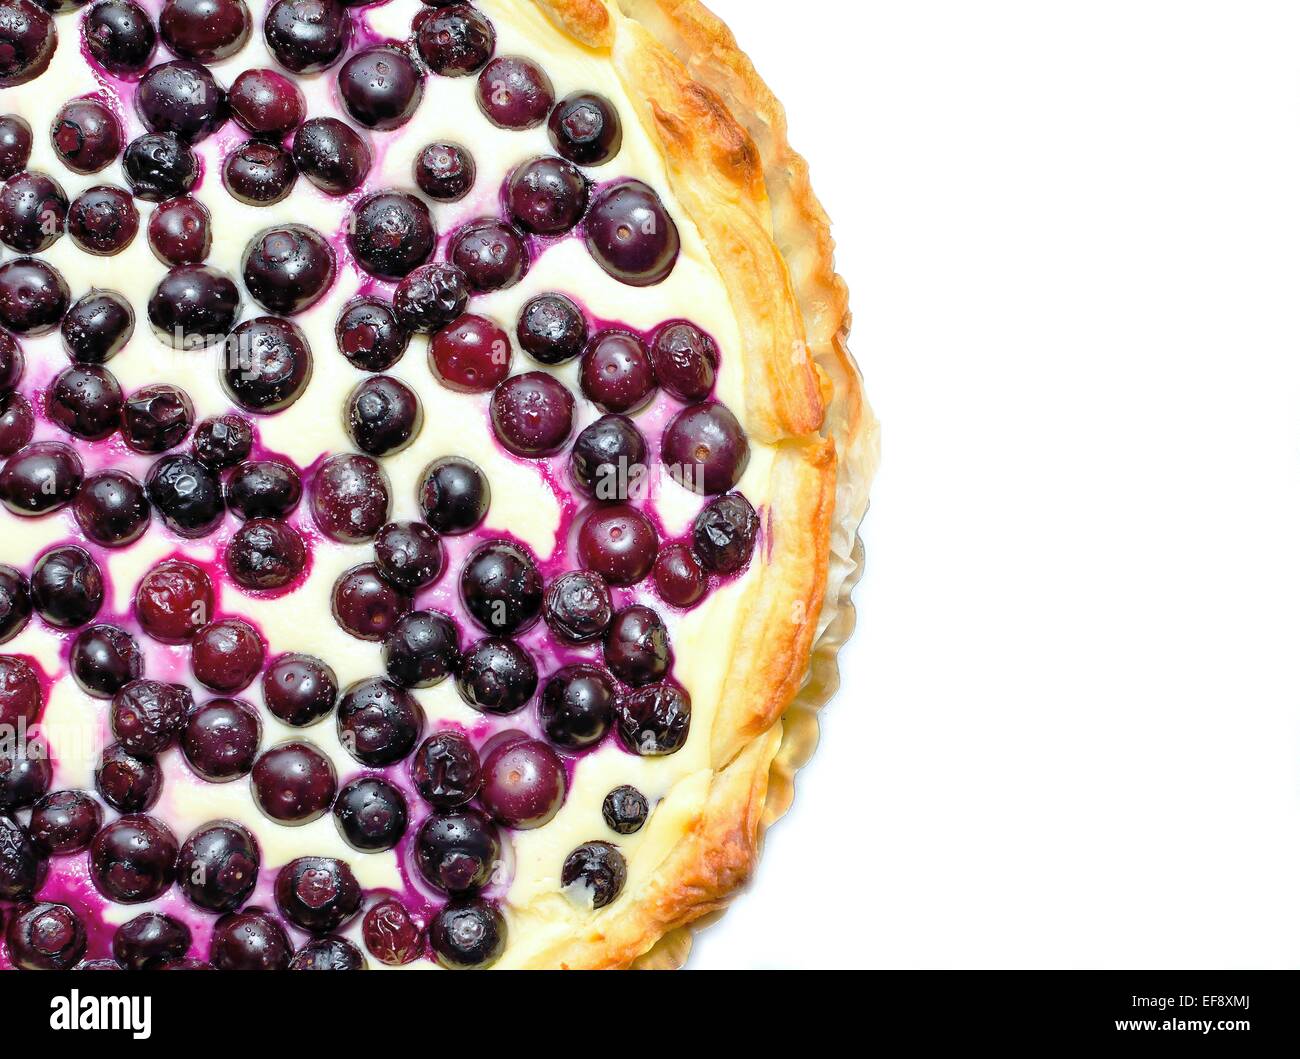 Top view on a blueberry cheese pie placed on a white background. Stock Photo